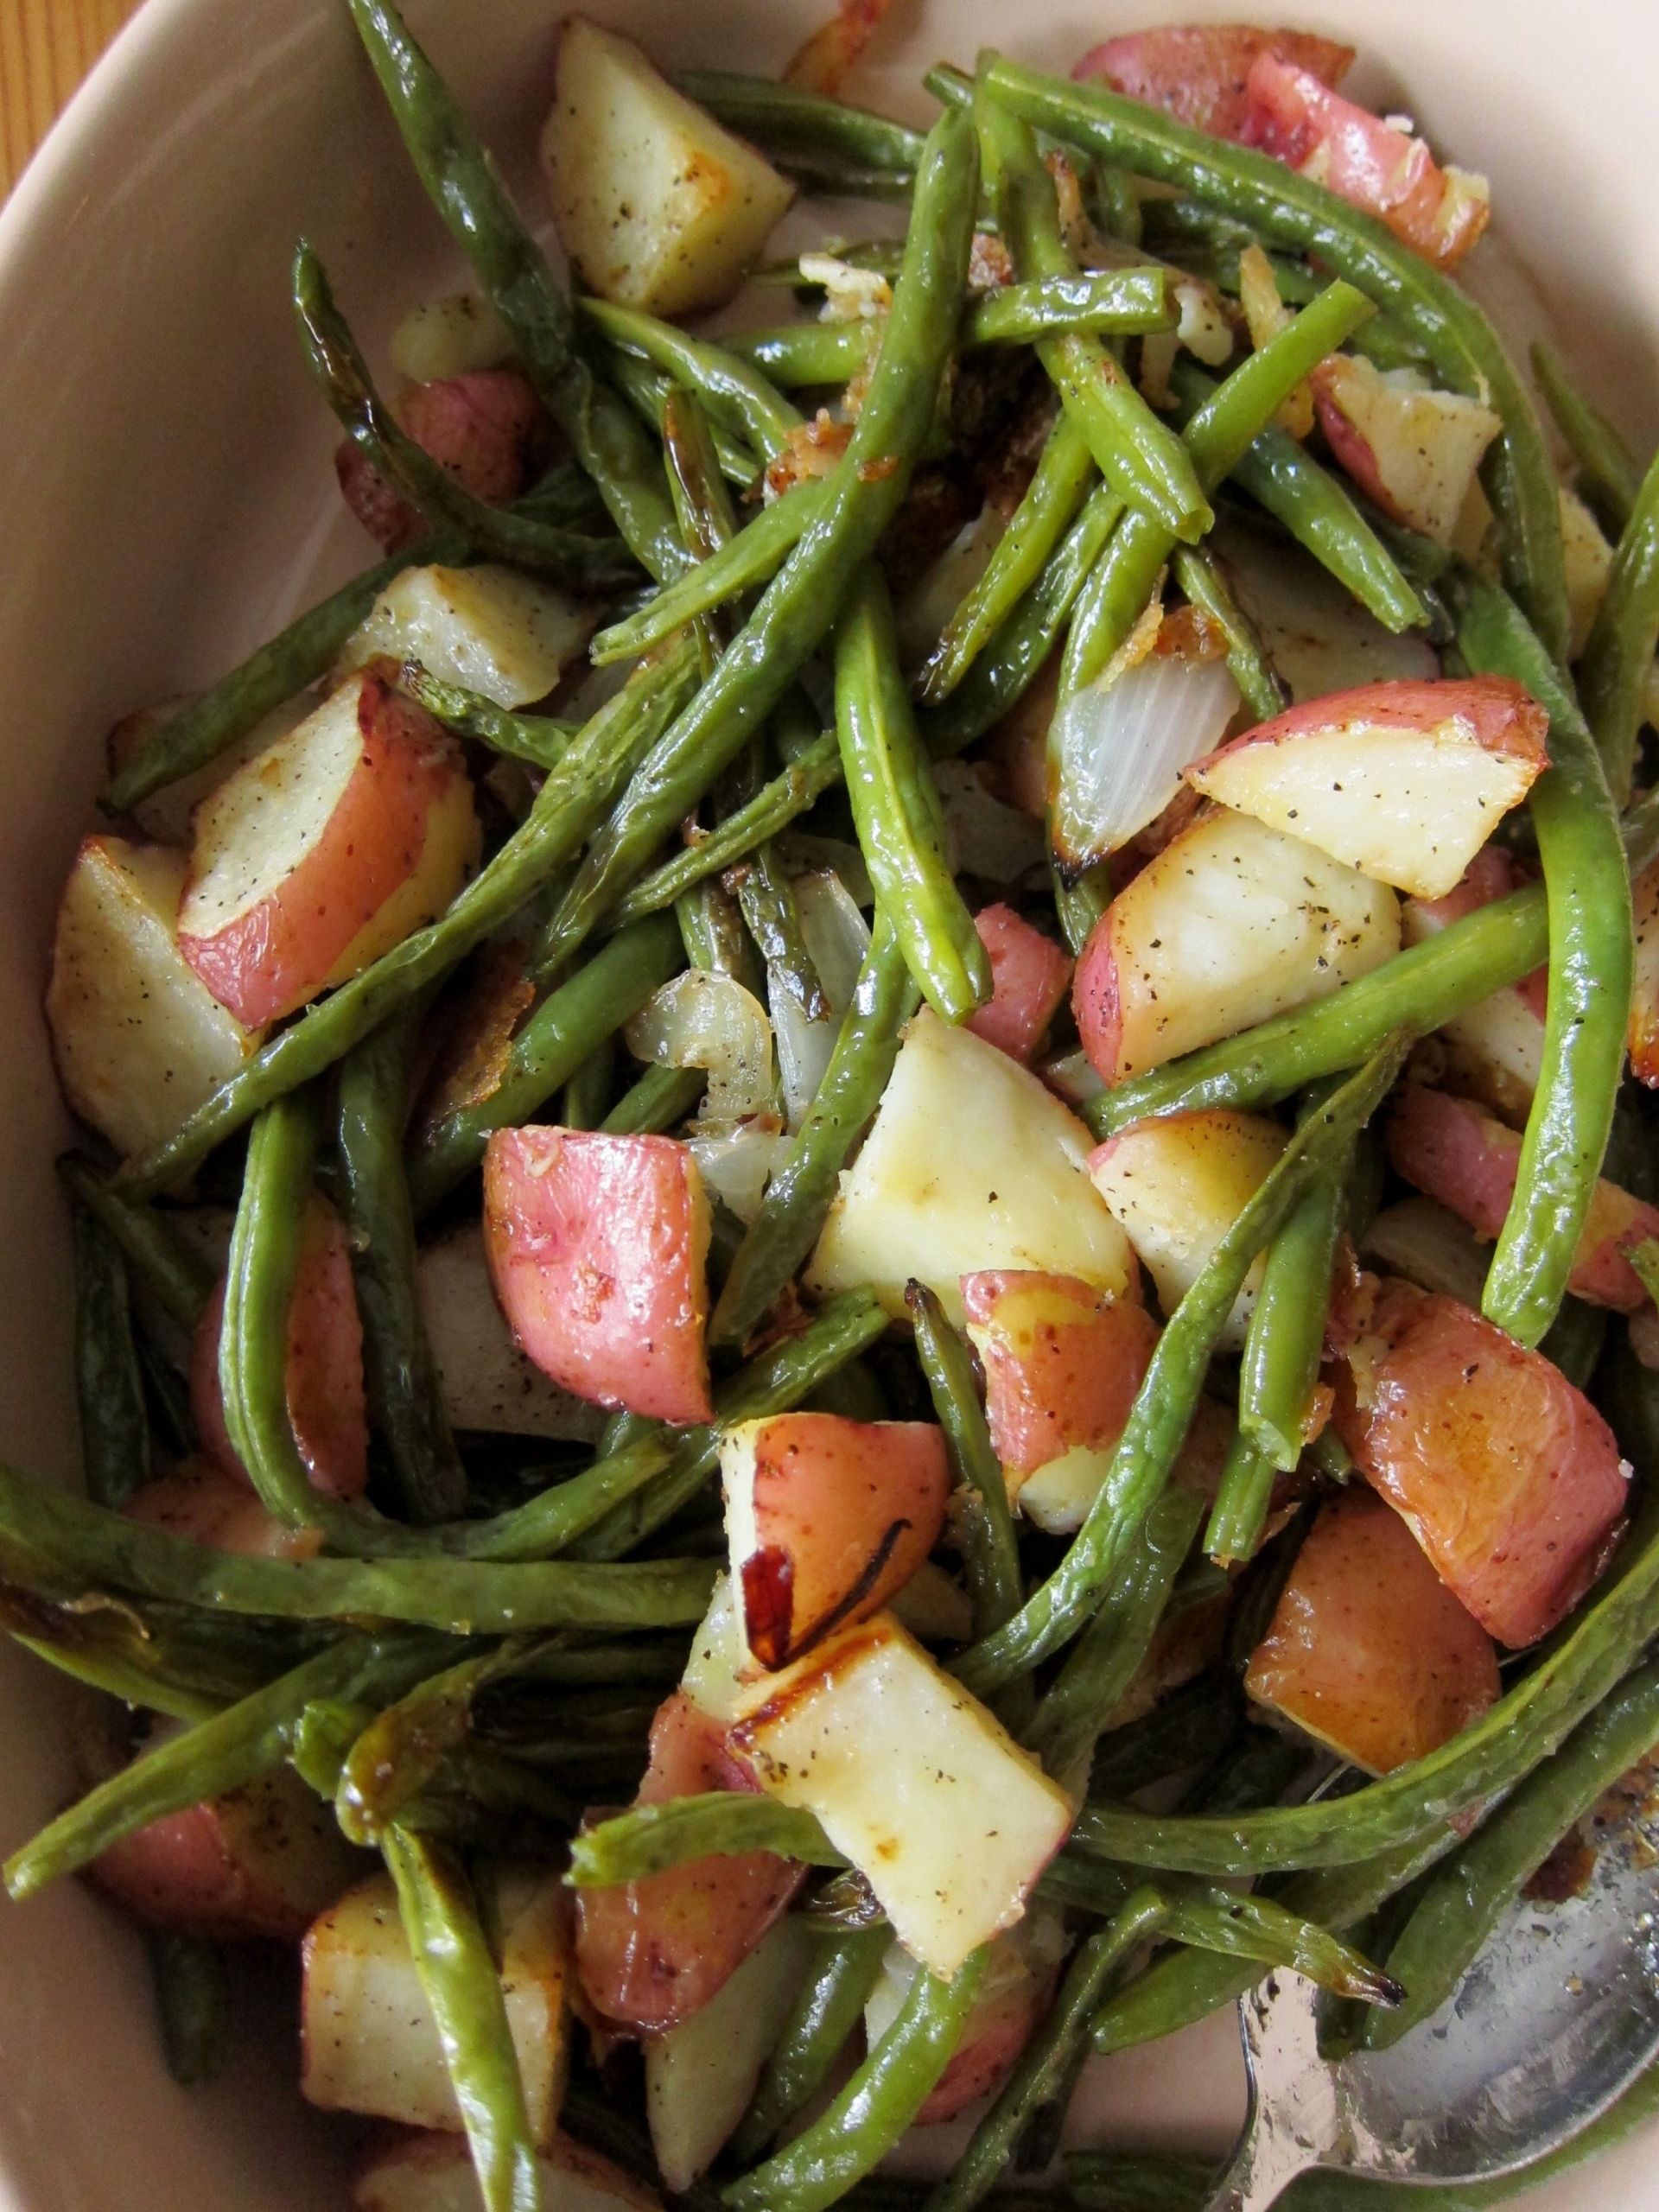 Beans Greens Potatoes
 Oven Roasted Potatoes and Green Beans